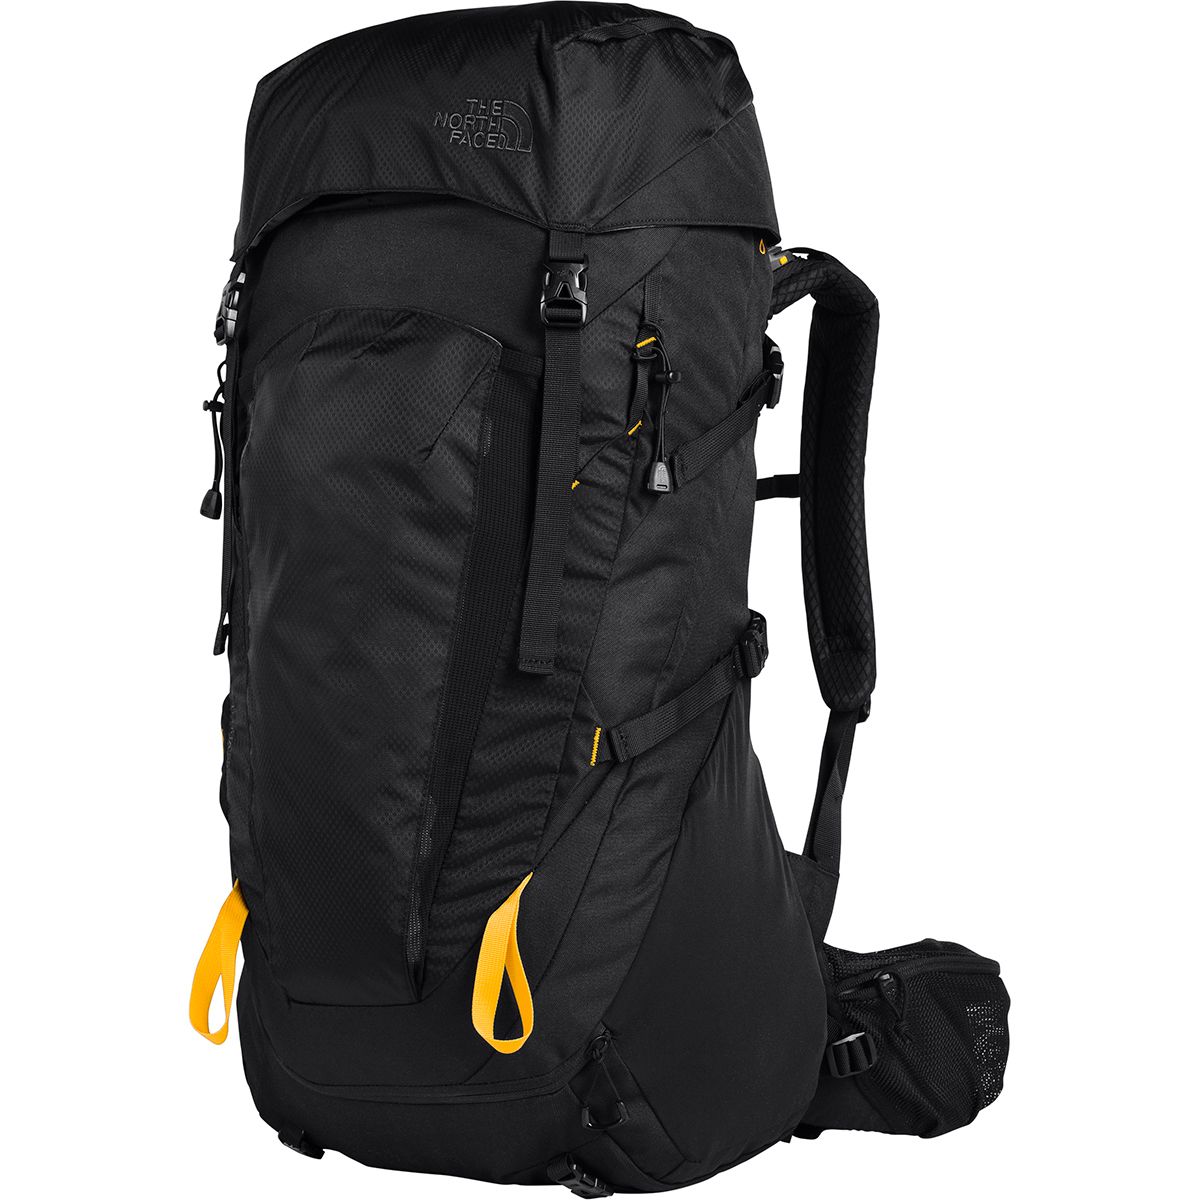 north face small hiking backpack